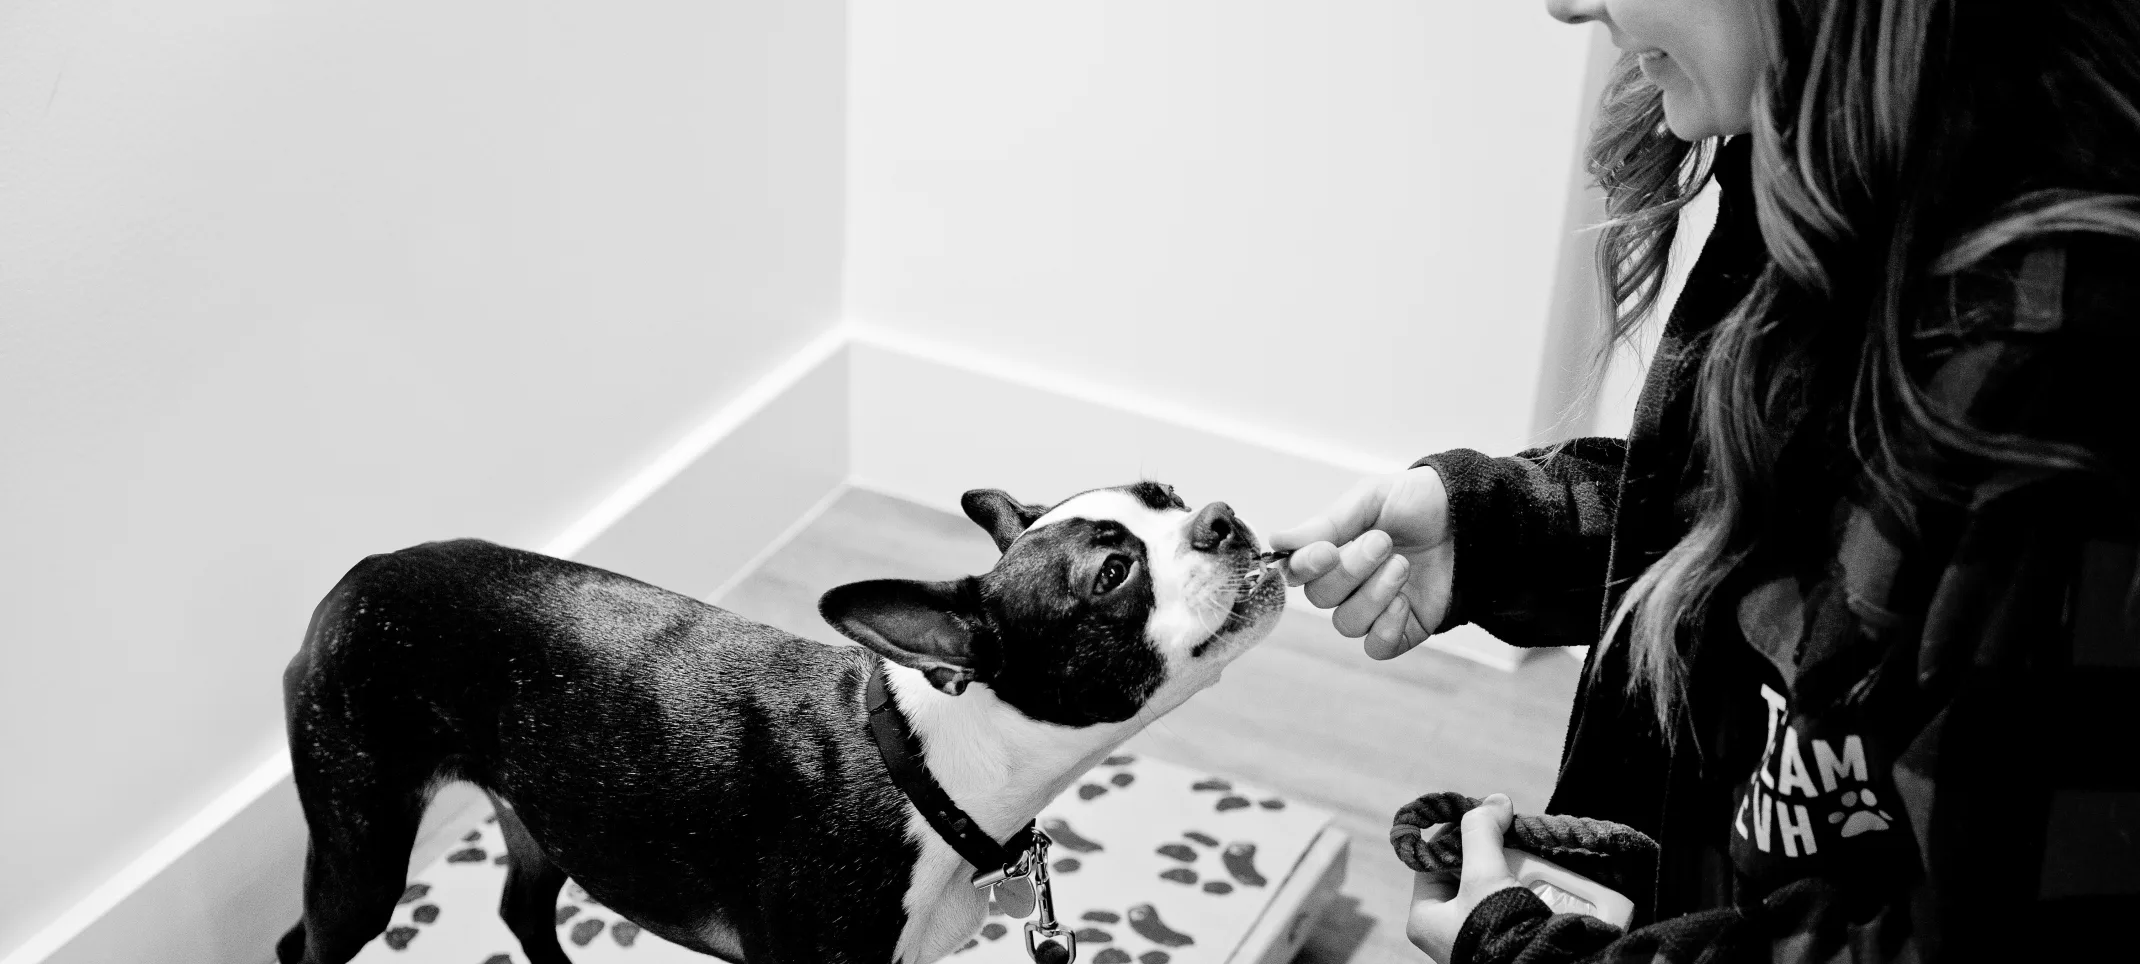 Black and white photo of a dog being given a treat